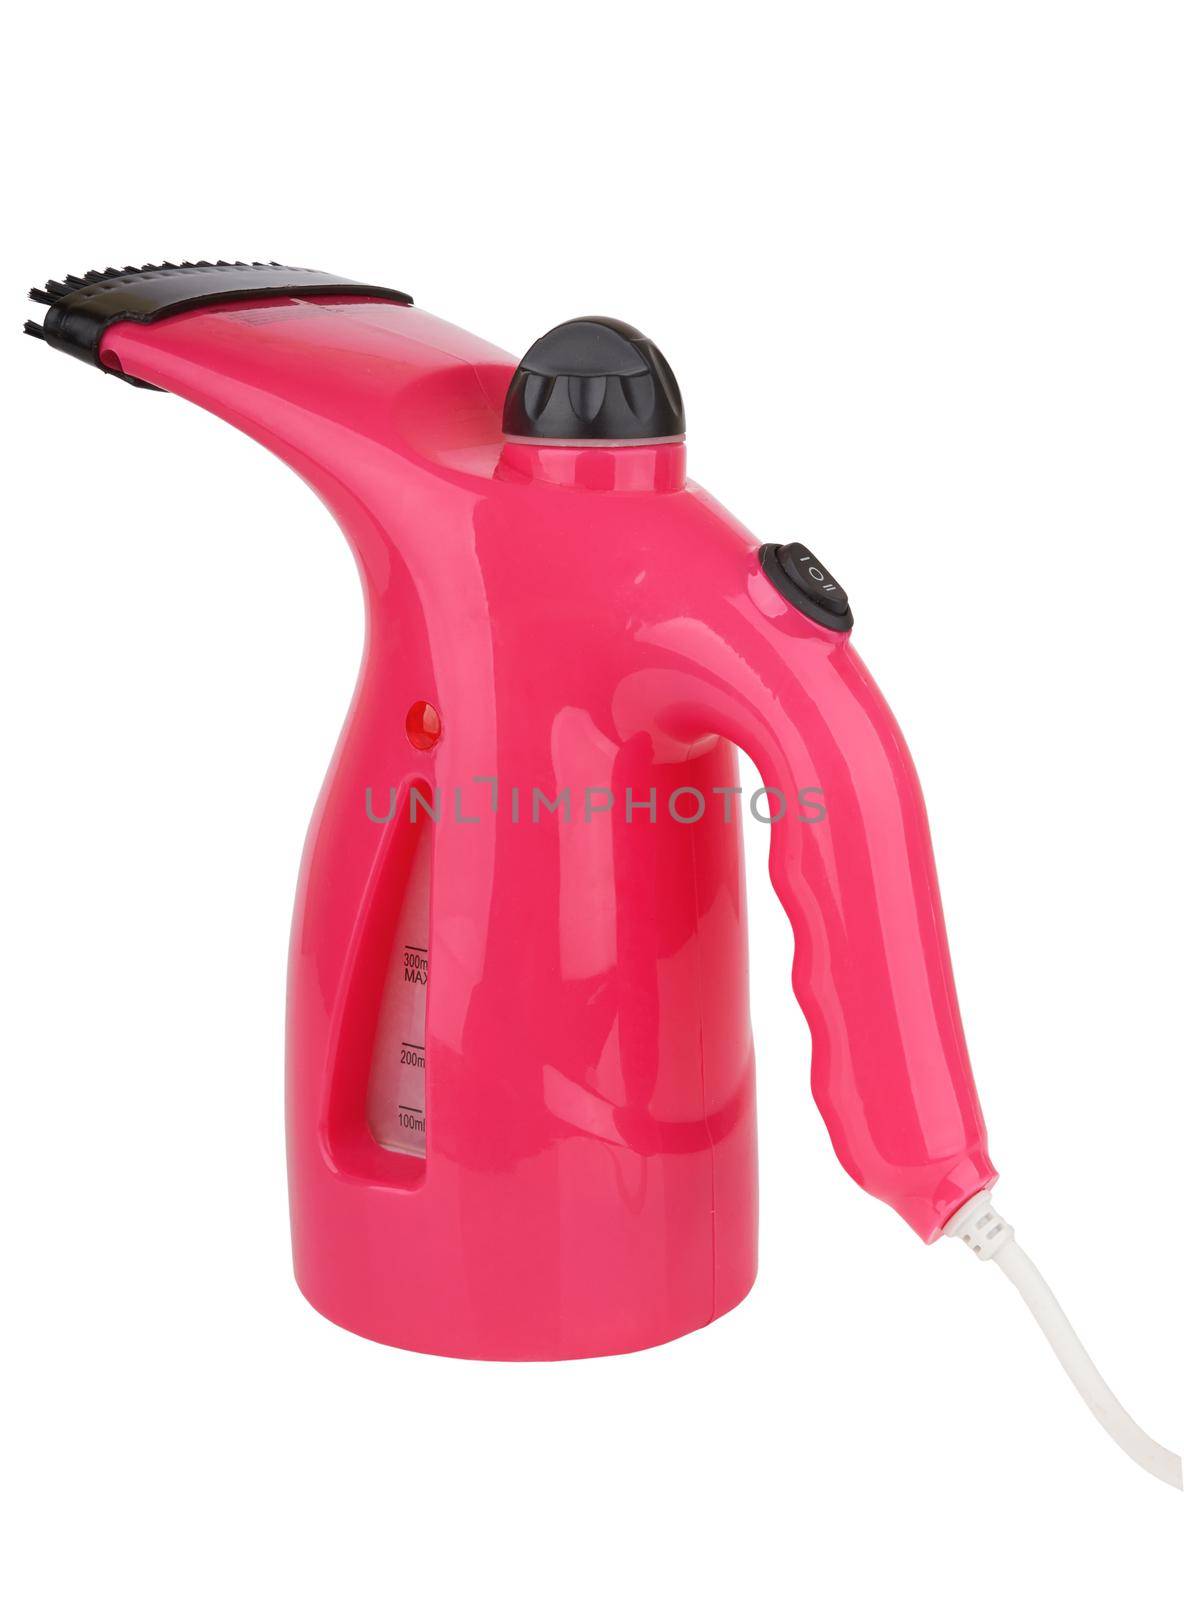 Hand steamer for clothes insulated on a white background.